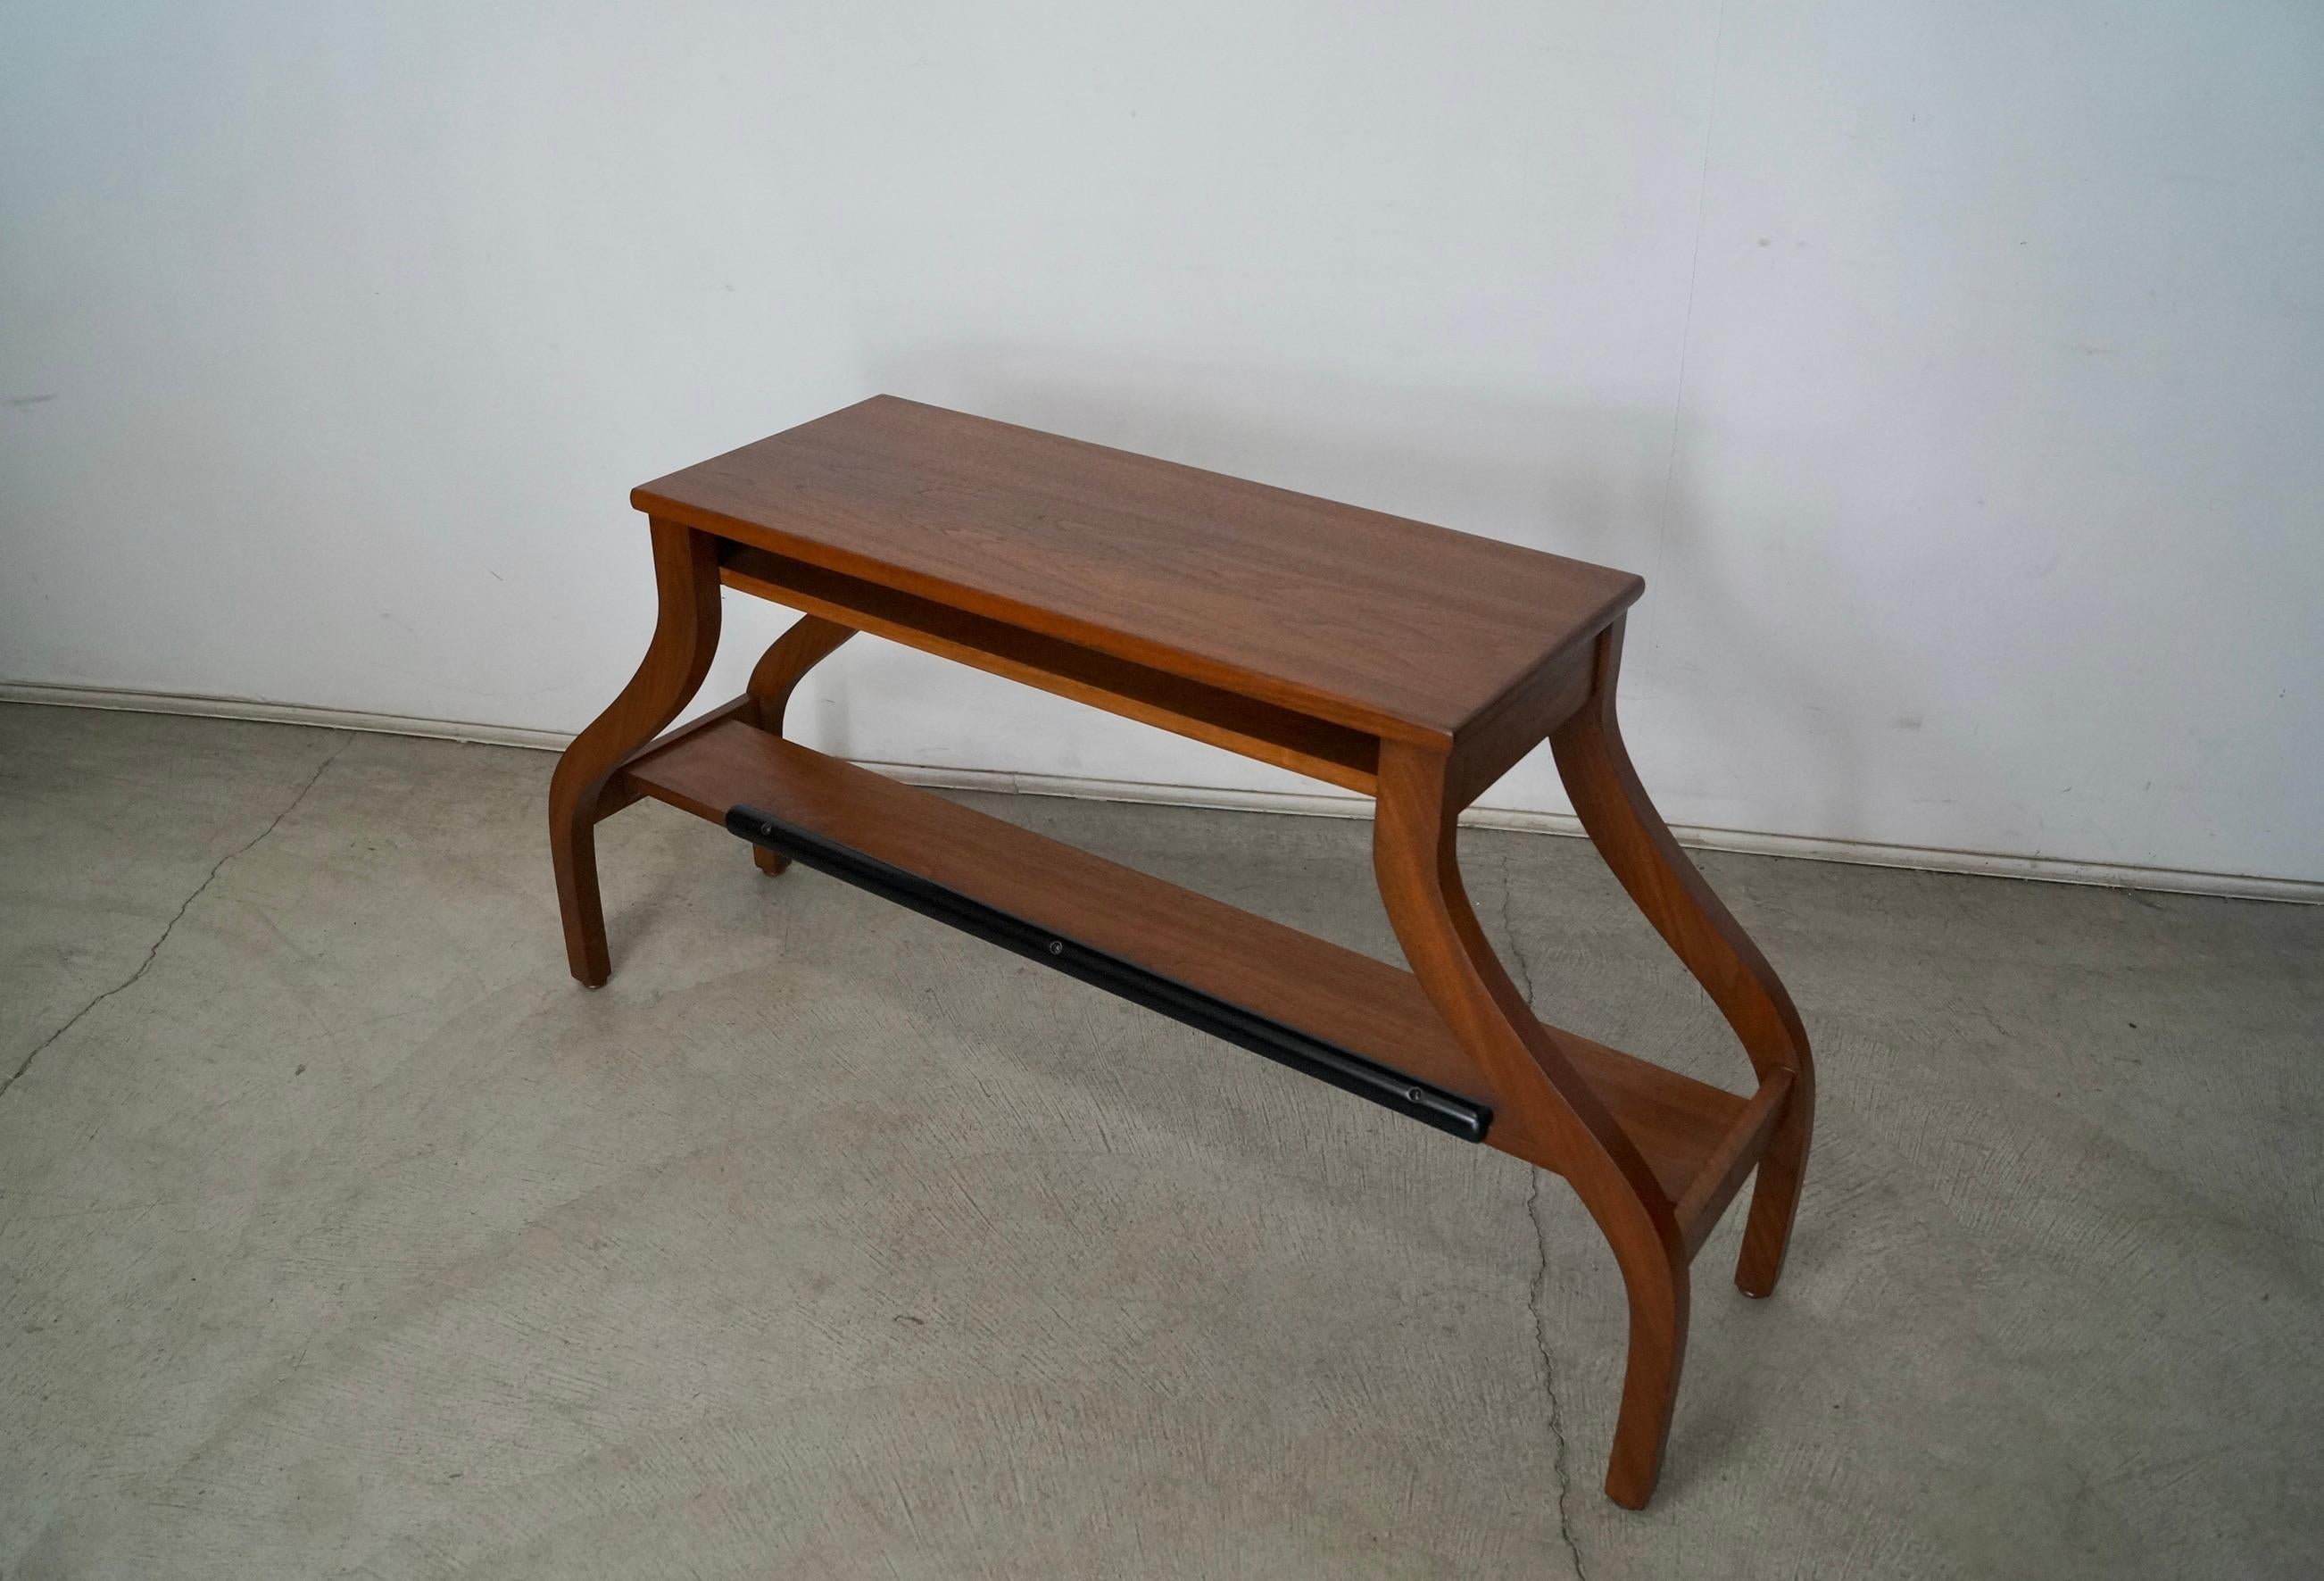 1950's Mid-Century Modern Walnut Console Table / Bench In Excellent Condition For Sale In Burbank, CA